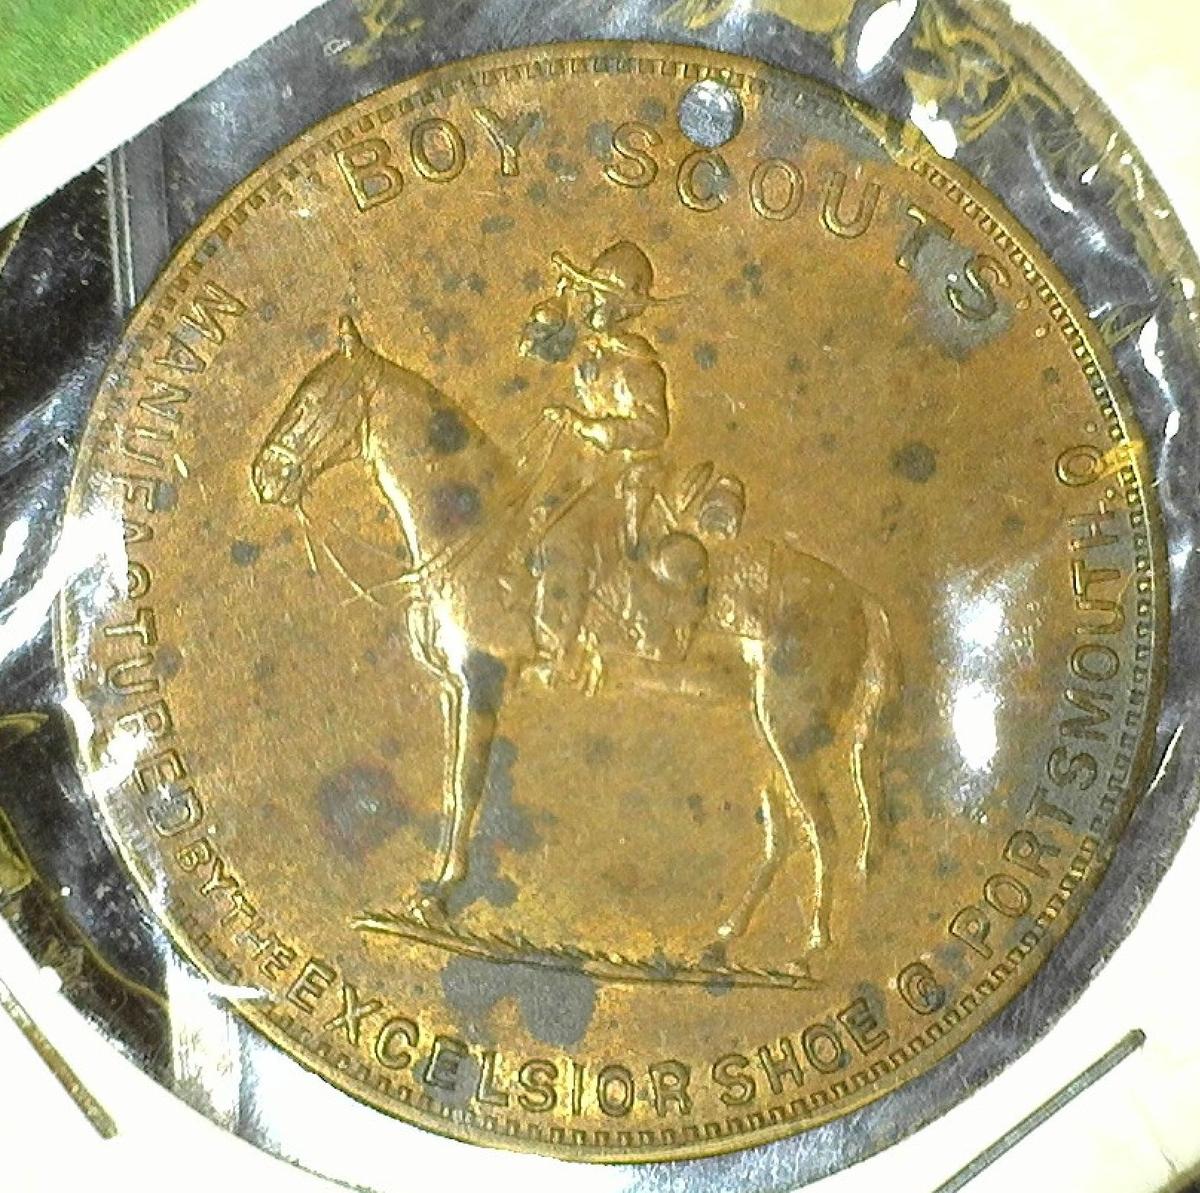 "Membership Emblem of the Boy Scouts Club/Good Luck", "Boy Scouts/Manufactured by the Excelsior Shoe